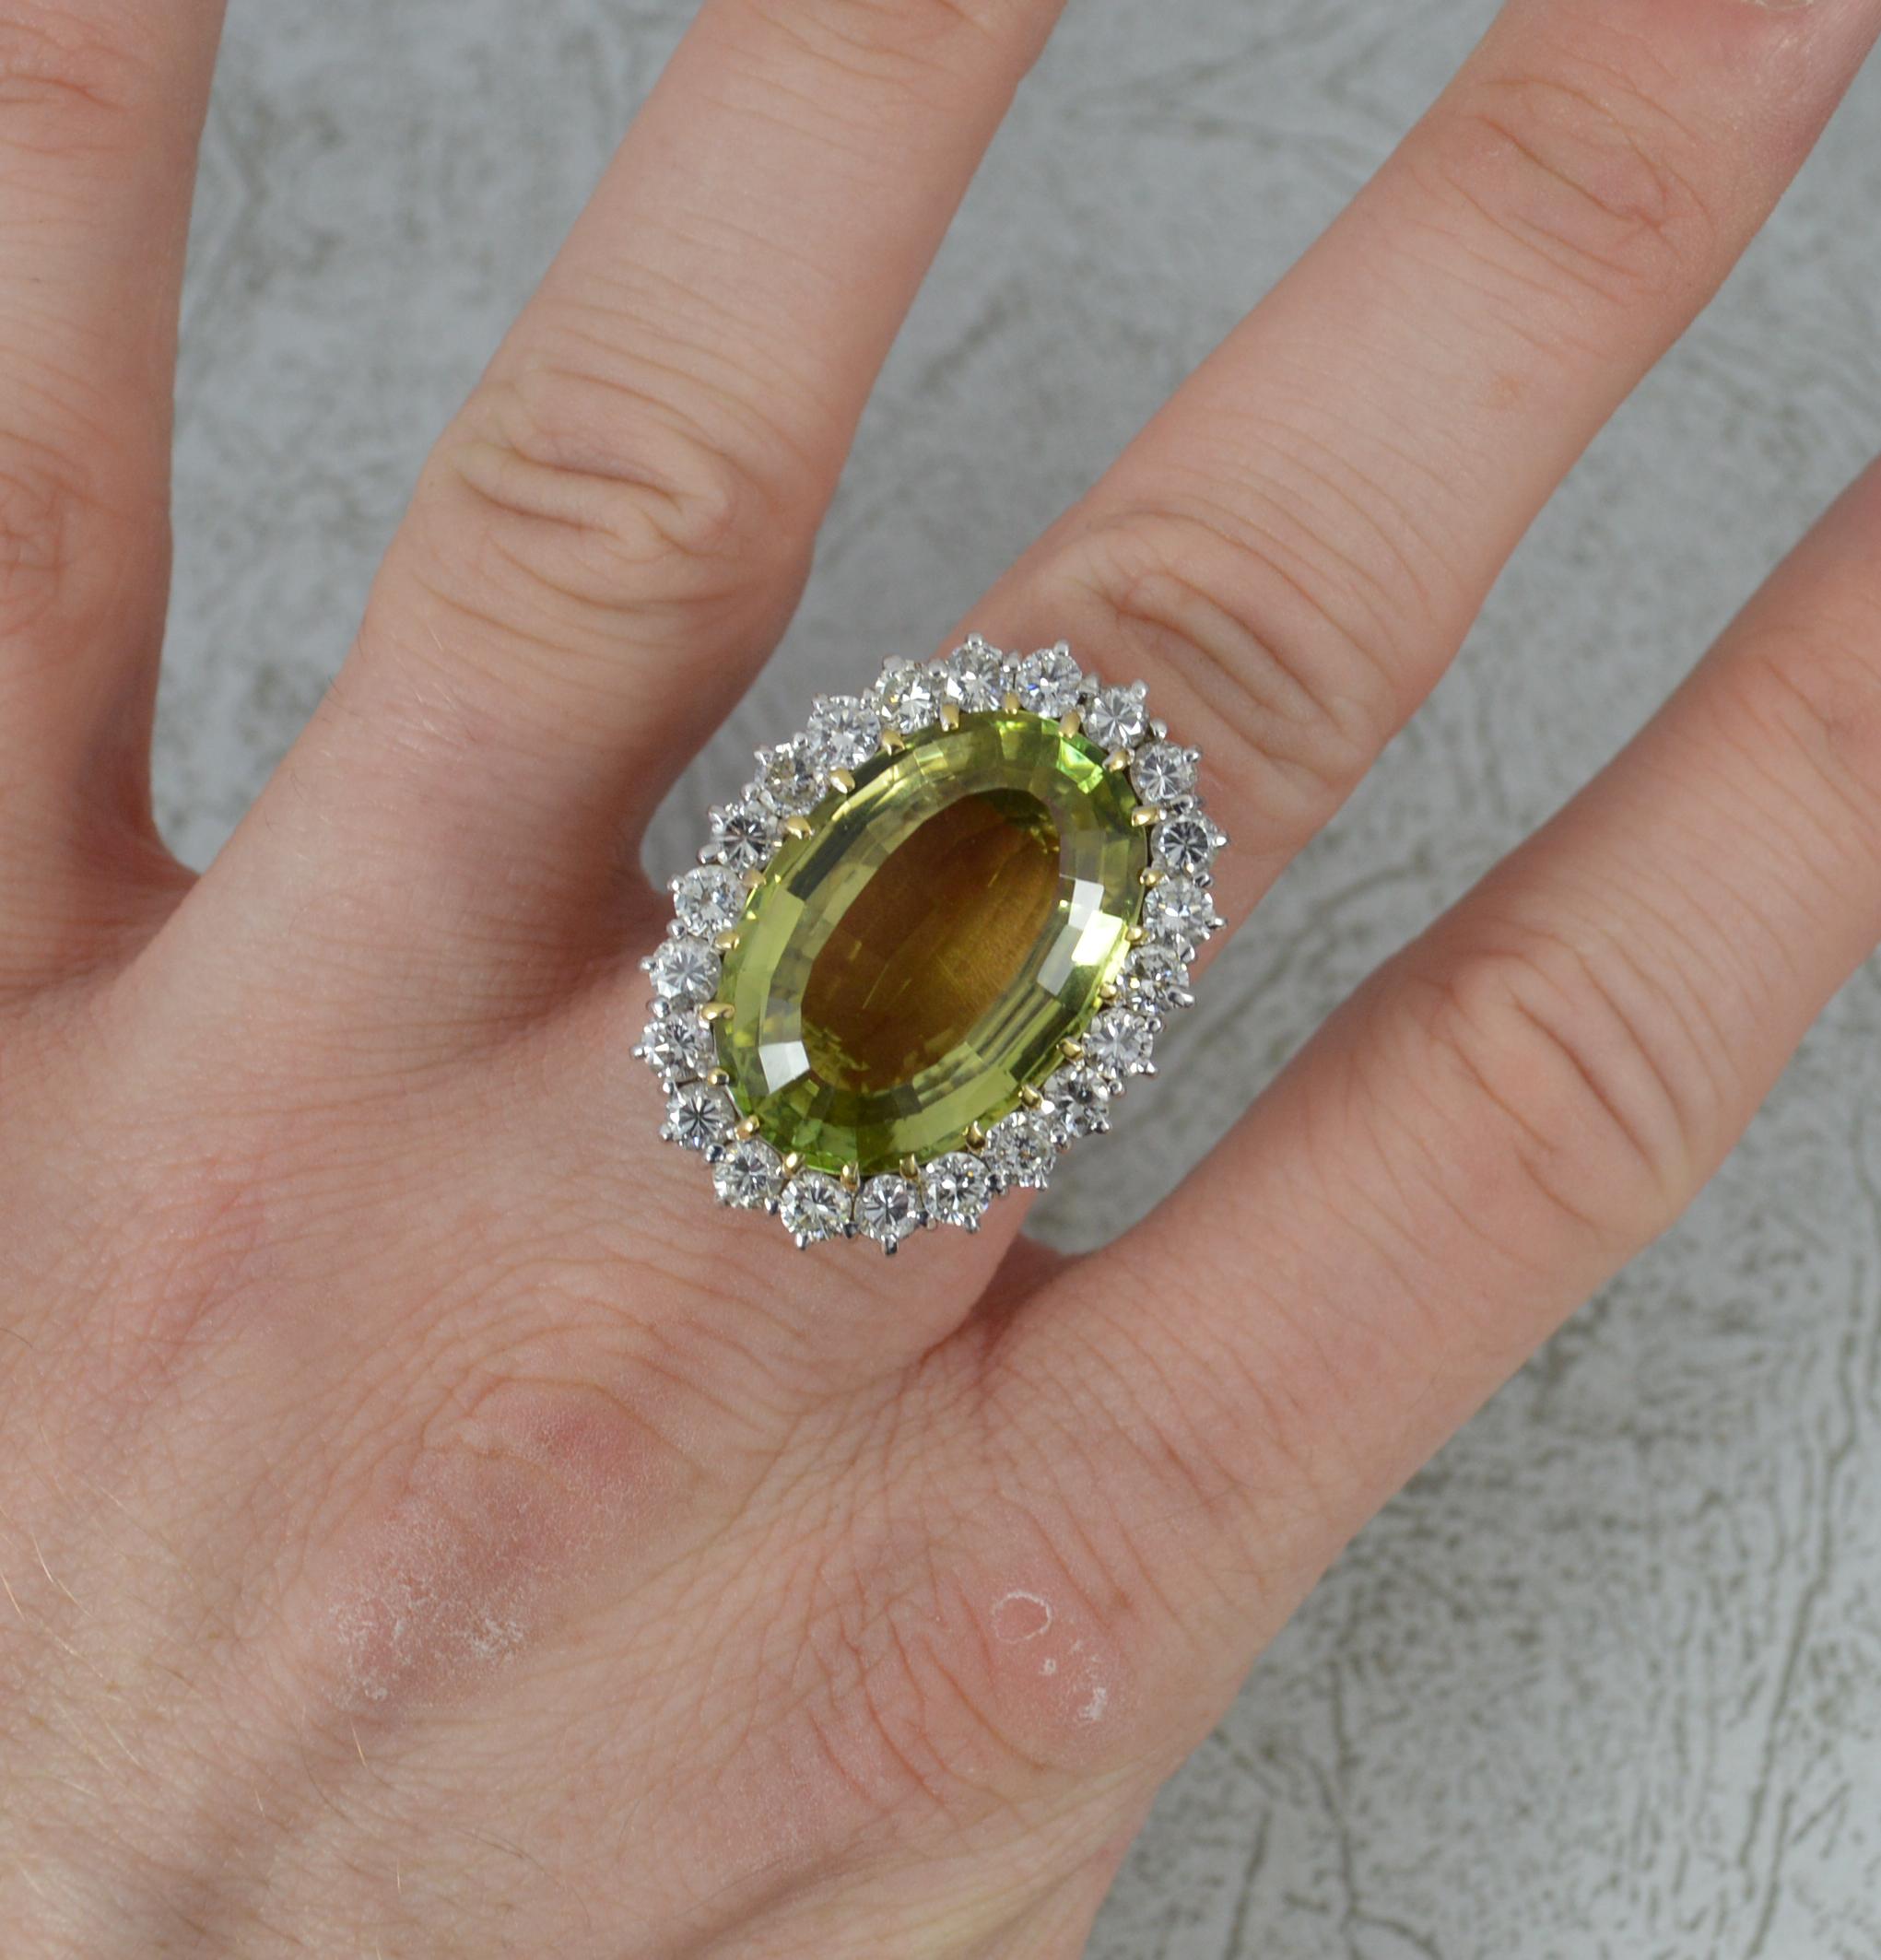 A classically shaped gemstone and diamond cocktail ring.
Solid 18 carat white gold example throughout.
Set with an oval cut green quartz to centre. 15mm x 22mm. Surrounding are twenty two natural round brilliant cut diamonds to total 2.20cts